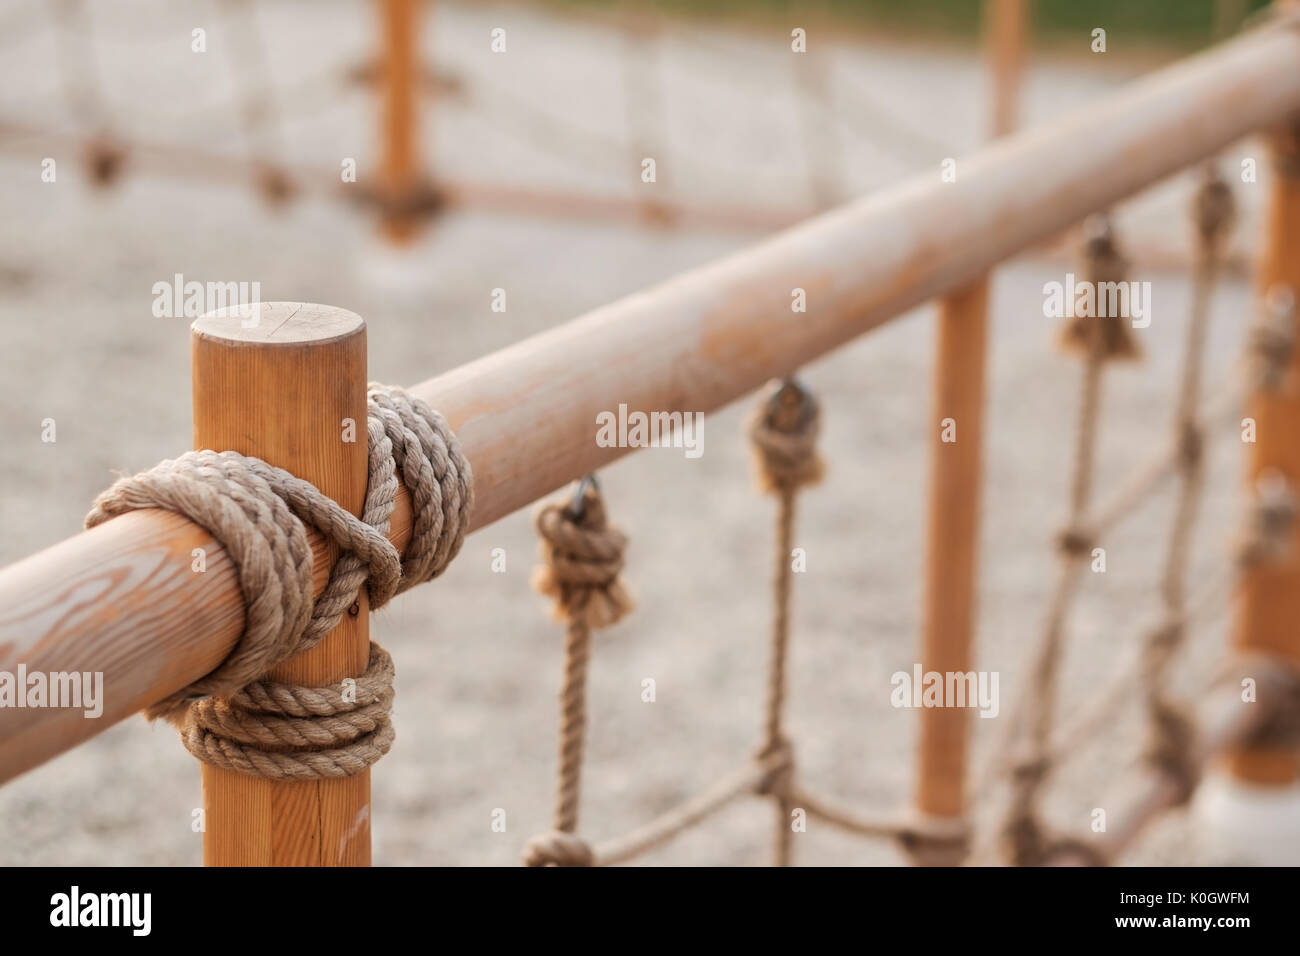 A wooden fence with rope at a playground Stock Photo